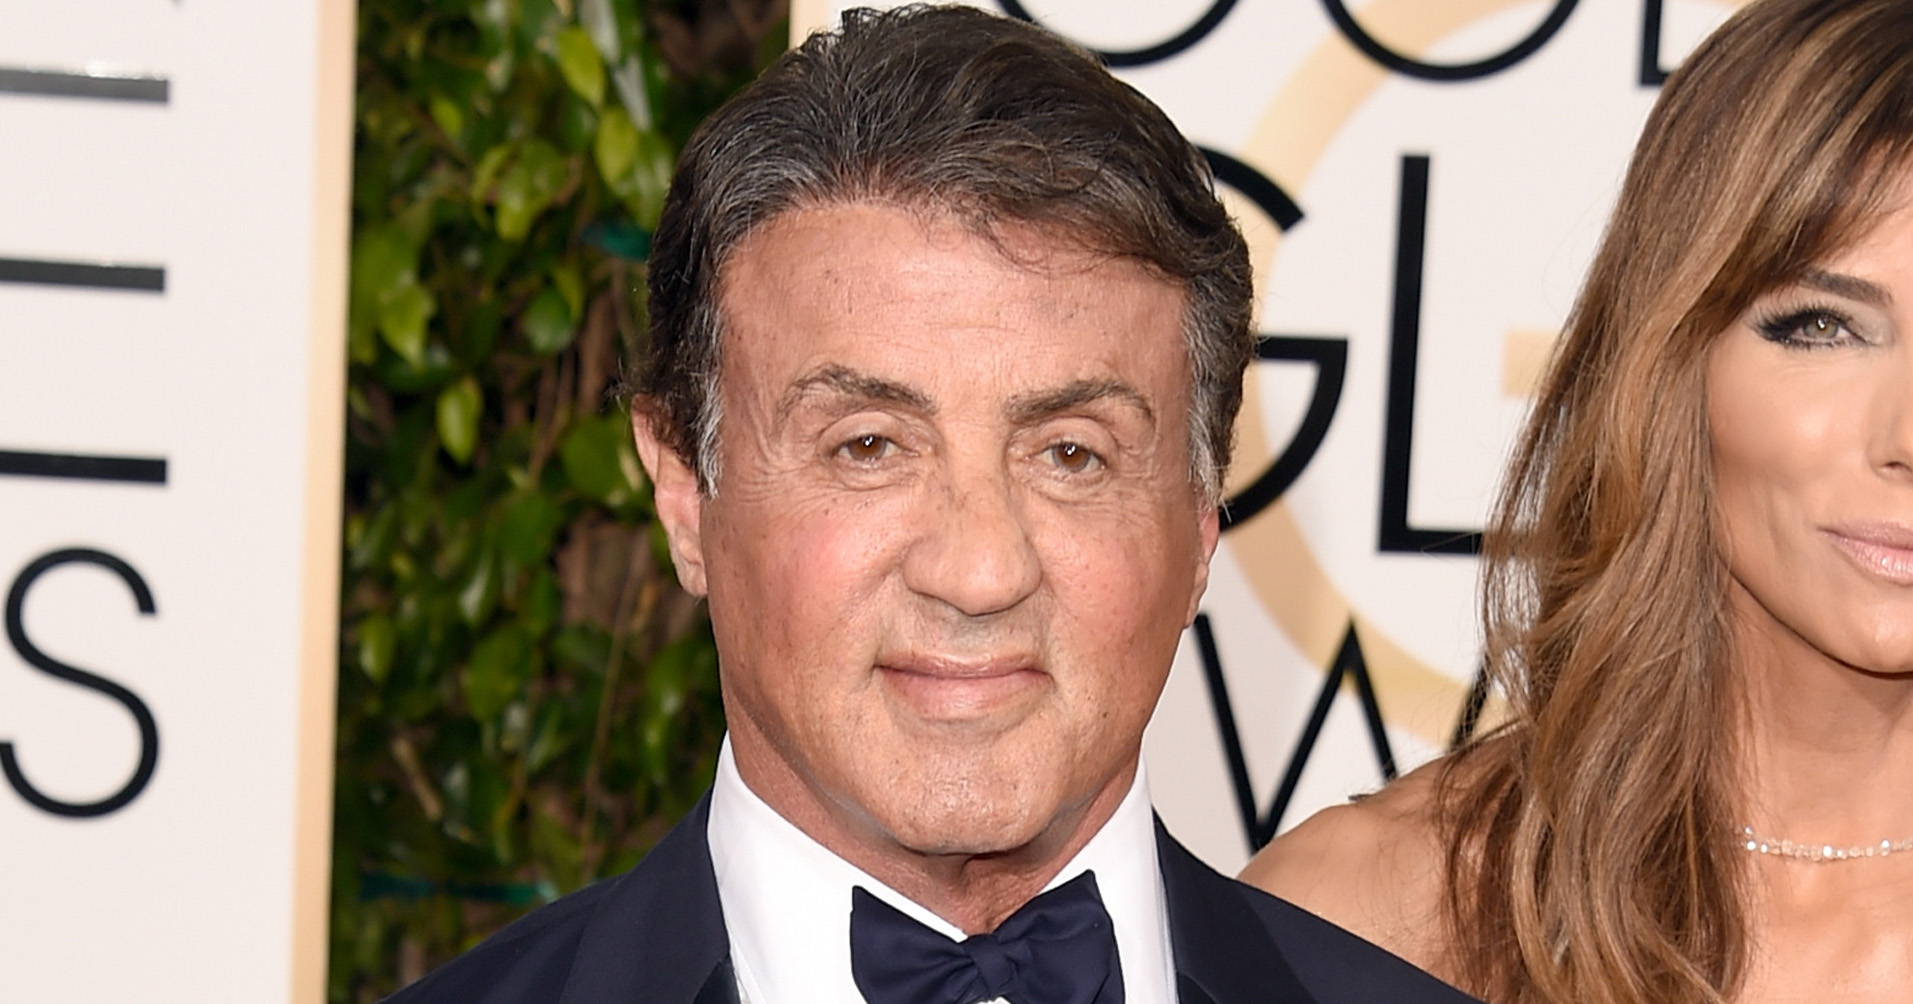 Sylvester Stallone attends the 73rd Annual Golden Globe Awards held at the Beverly Hilton Hotel on Jan. 10, 2016 in Beverly Hills. (Jason Merritt—Getty Images)